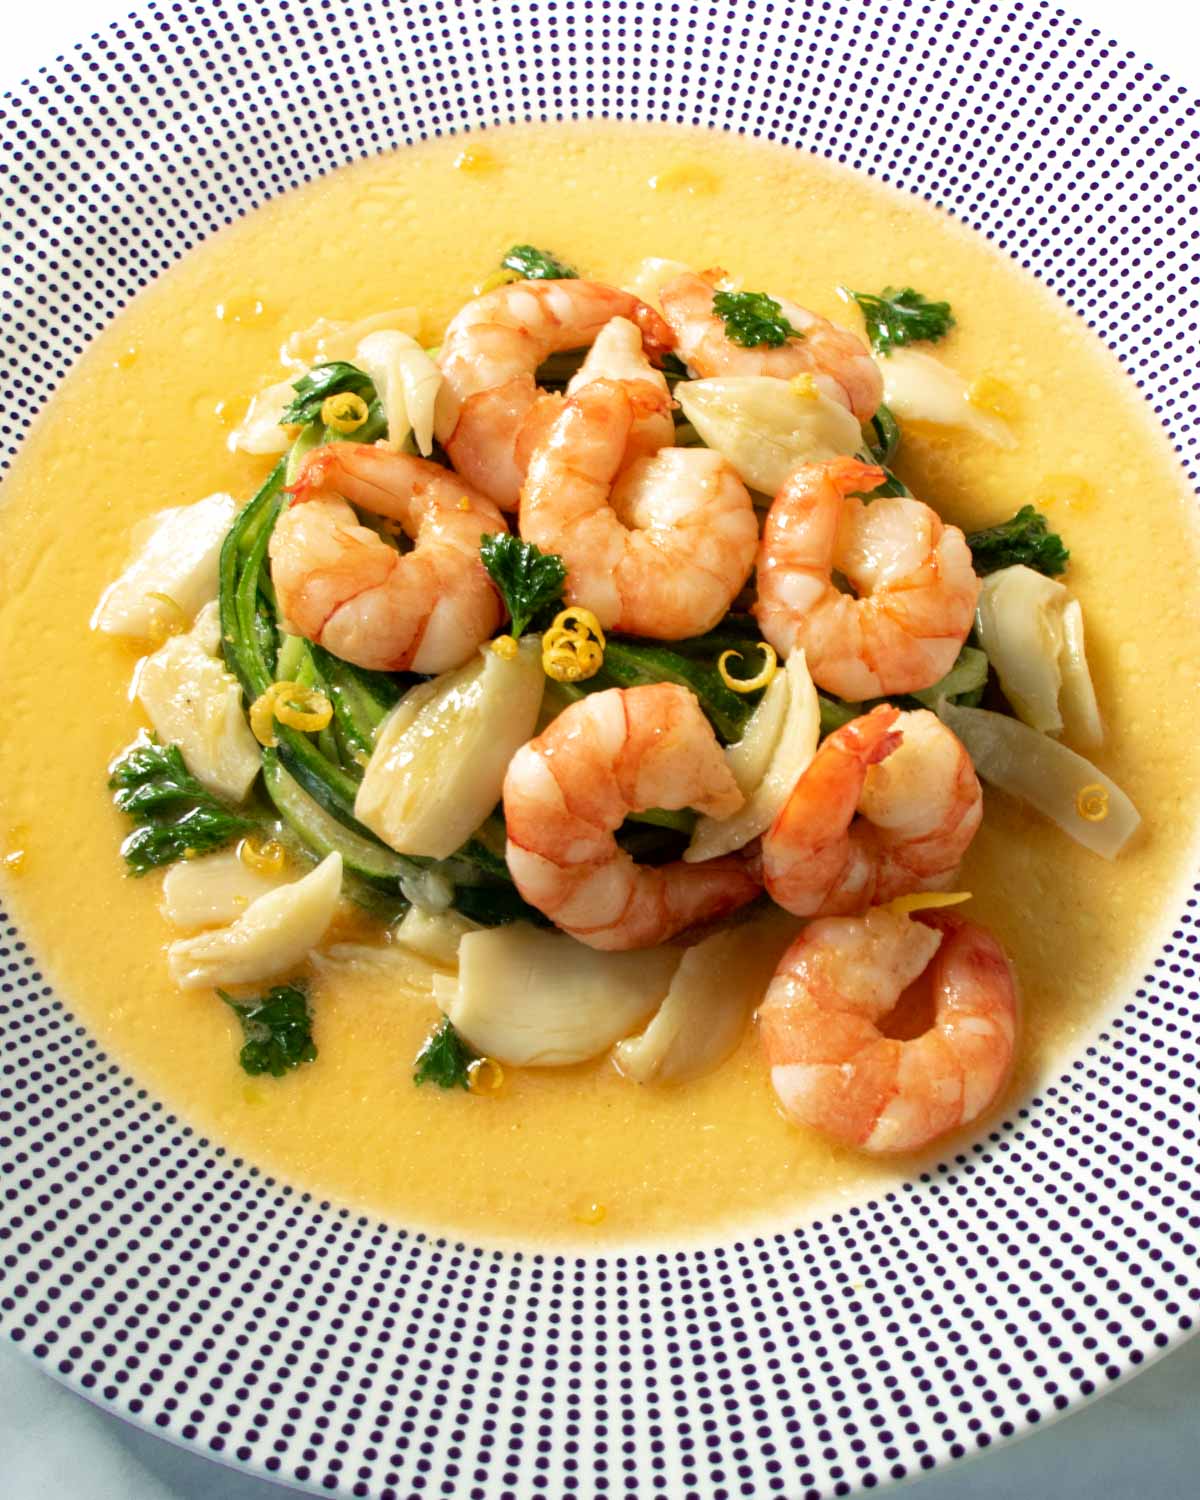 Simple, yet luxurious shrimp in garlicky butter sauce with a splash of white wine and lemon is sure to impress. This quick and easy seafood classic takes only minutes to whip up. Only 4g carbs.